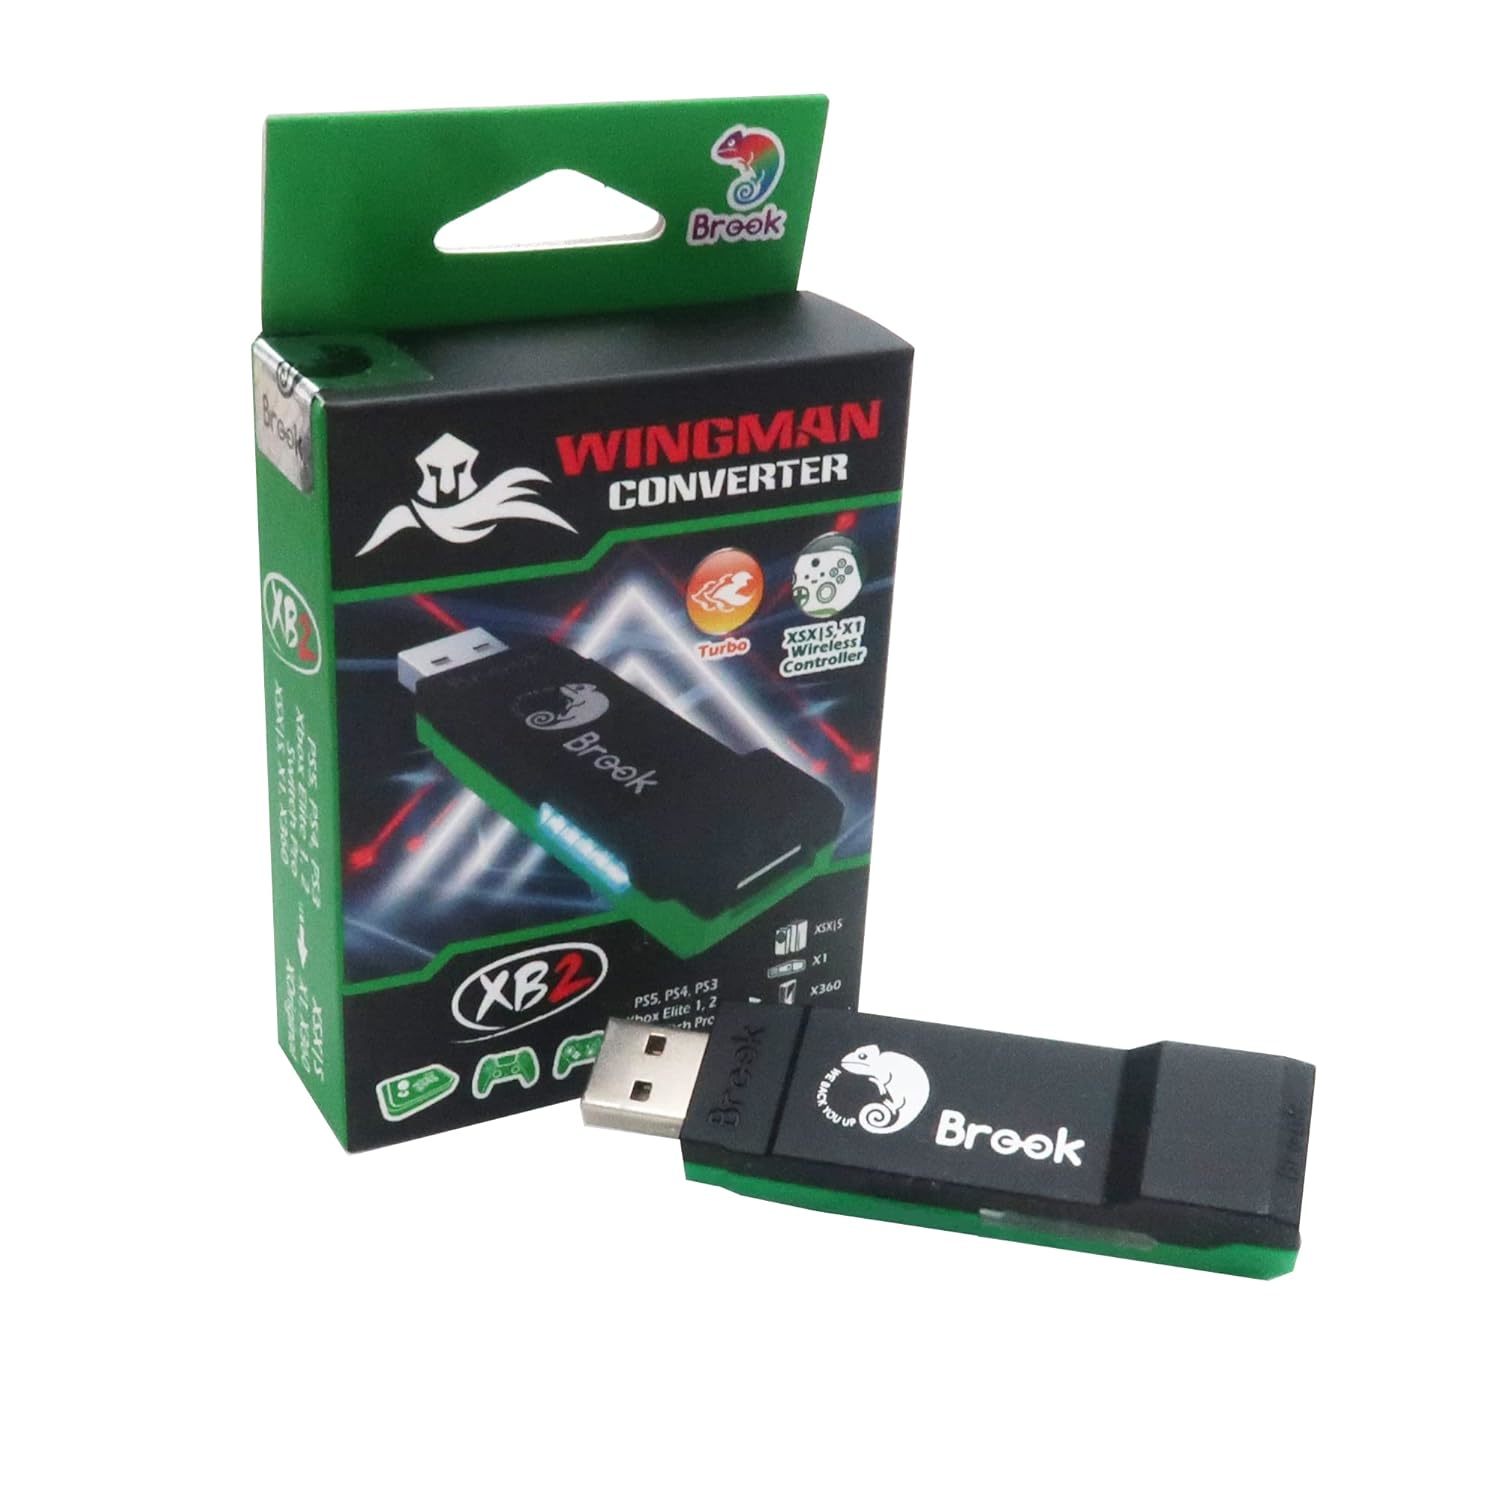 Primary image for Xbox One, Xbox 360, Xbox Series X|S, Pc, And Brook Wingman Xb2 Converter.